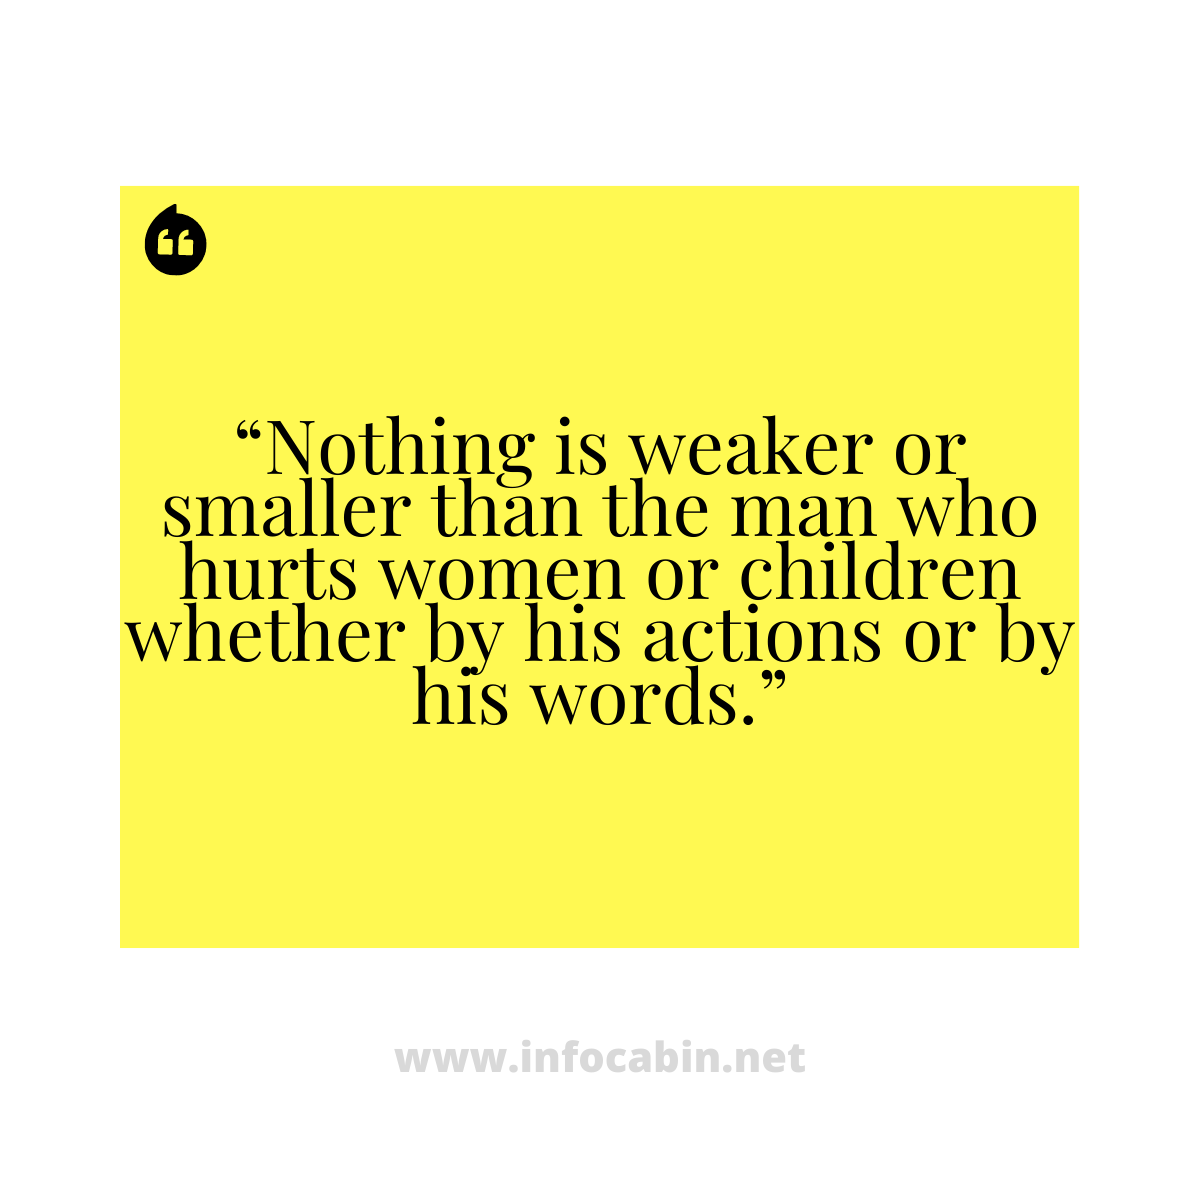 “Nothing is weaker or smaller than the man who hurts women or children whether by his actions or by his words.”